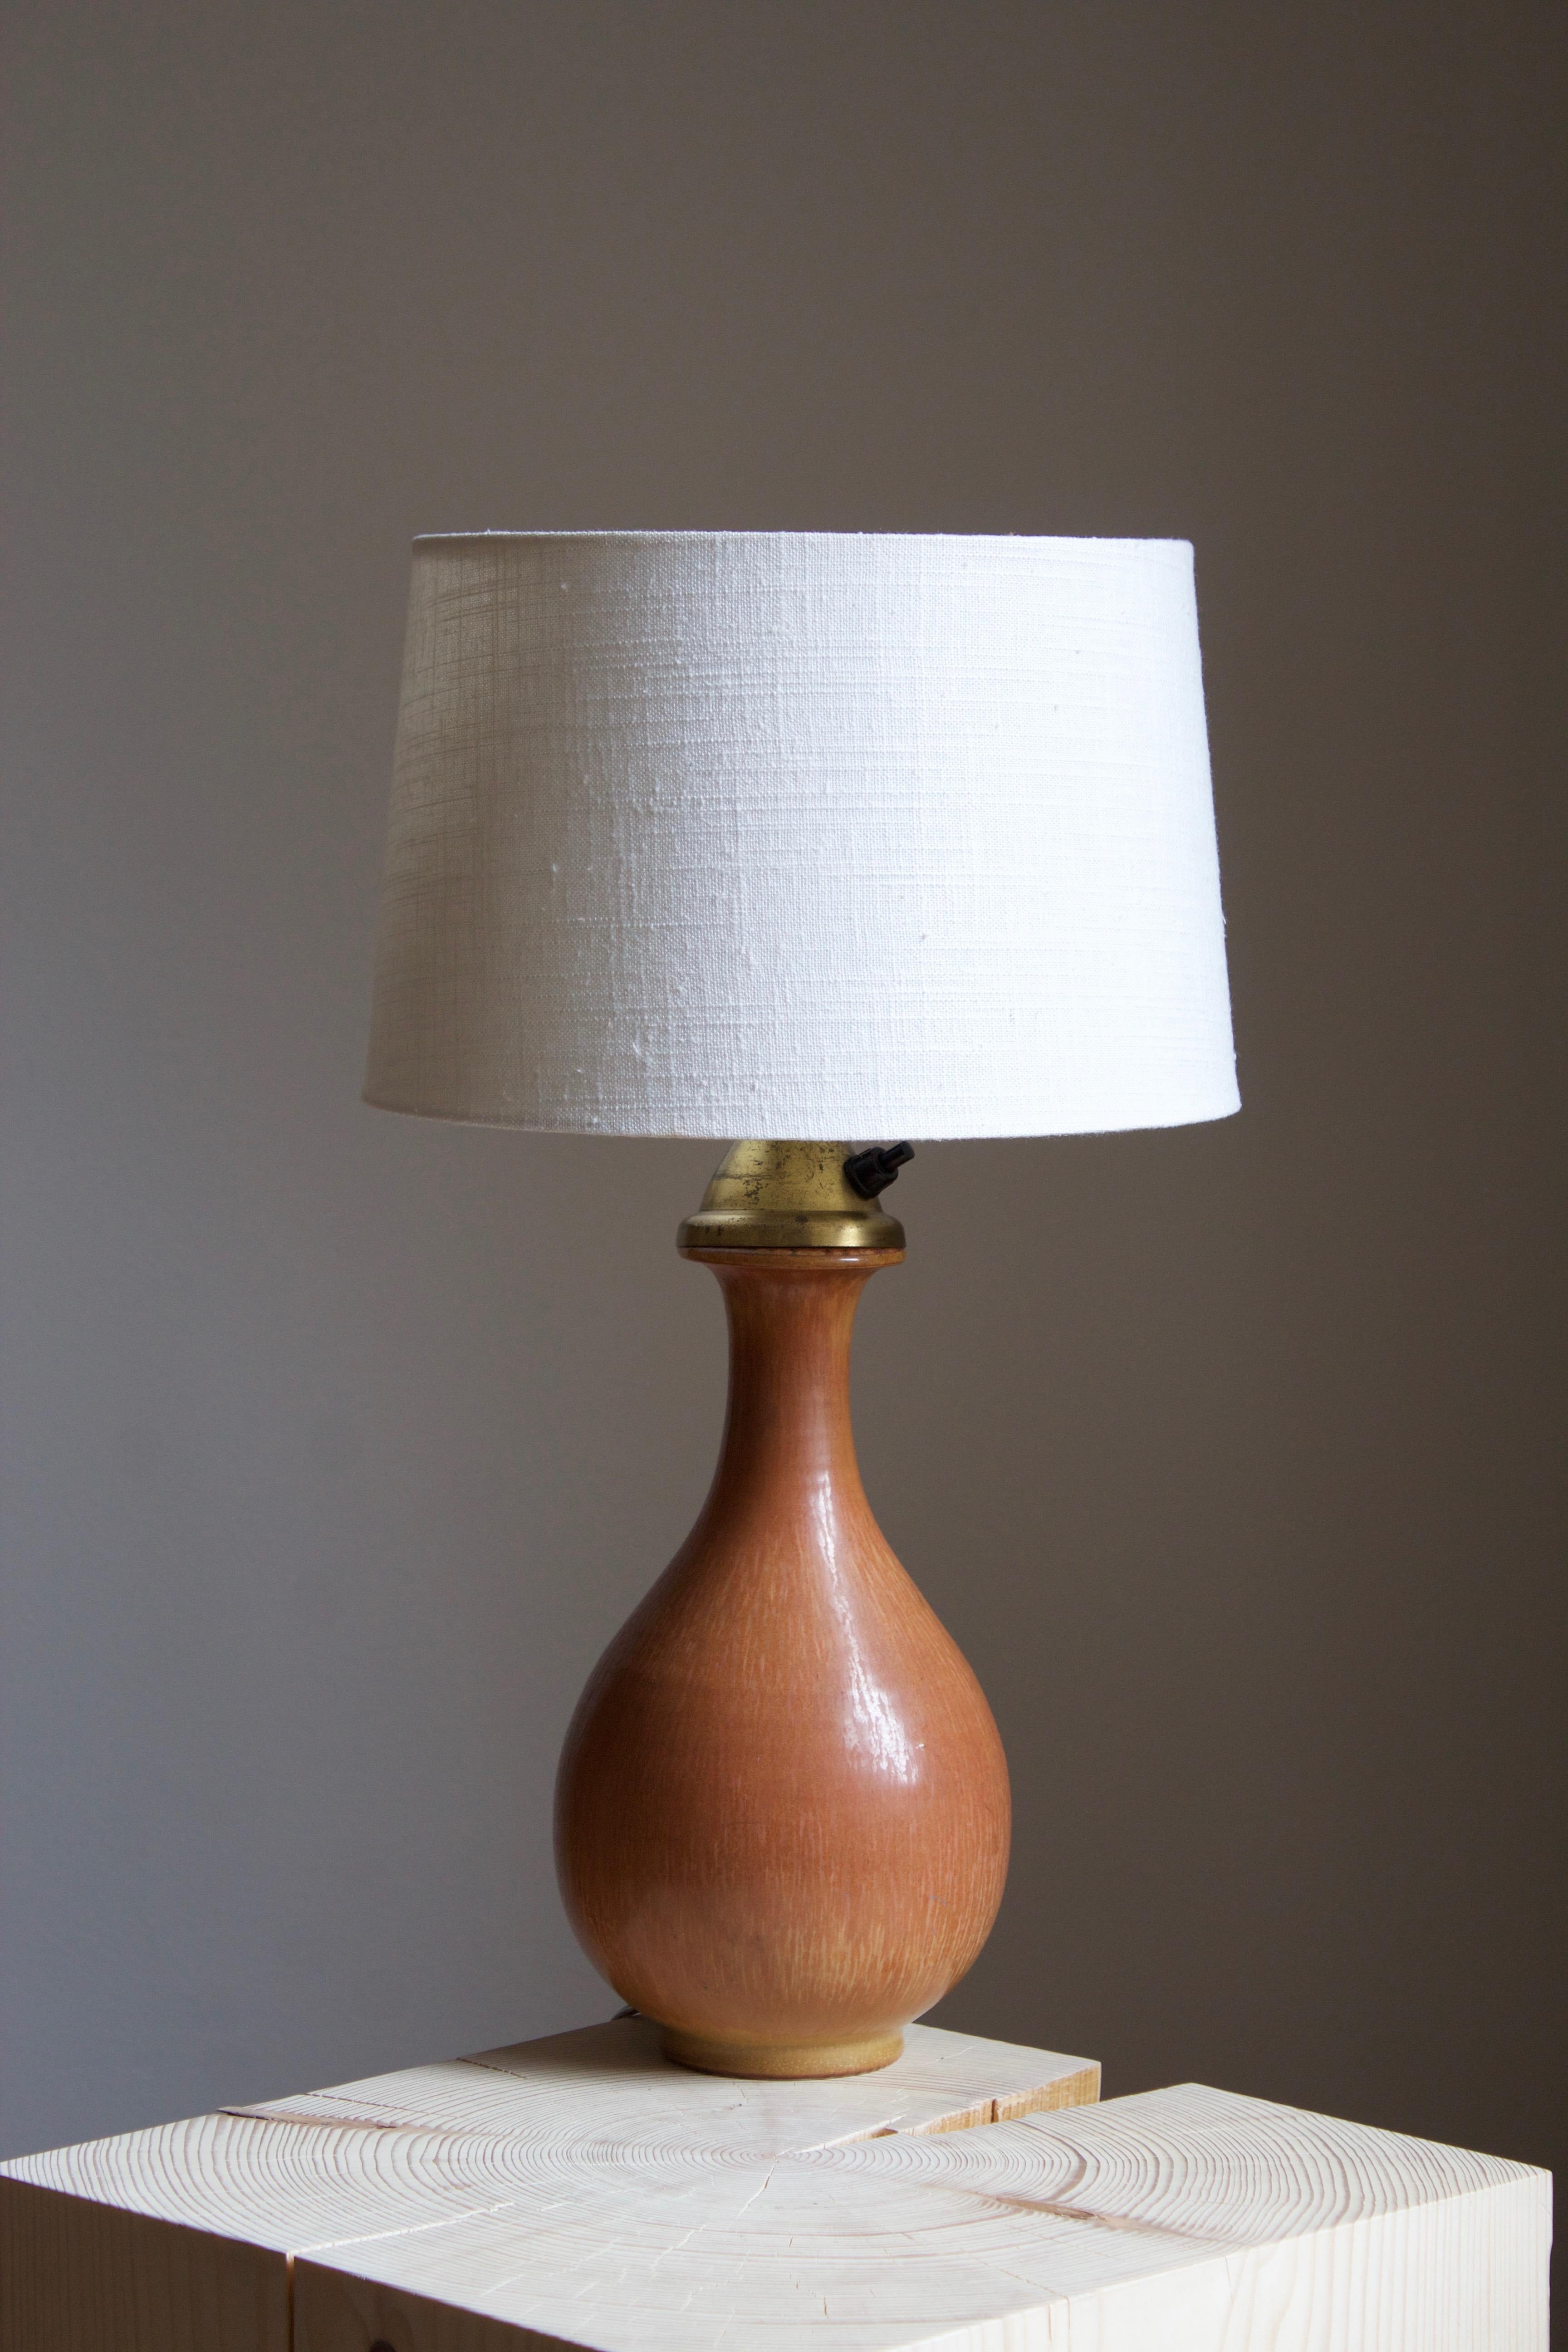 A table lamp produced by Rörstrand, Sweden, 1950s. Designed by Gunnar Nylund, (Swedish, 1914-1997). Signed.

Sold without lampshade, stated dimensions exclude lampshade but includes socket.

Nylund served as artistic director at Rörstrand, where he